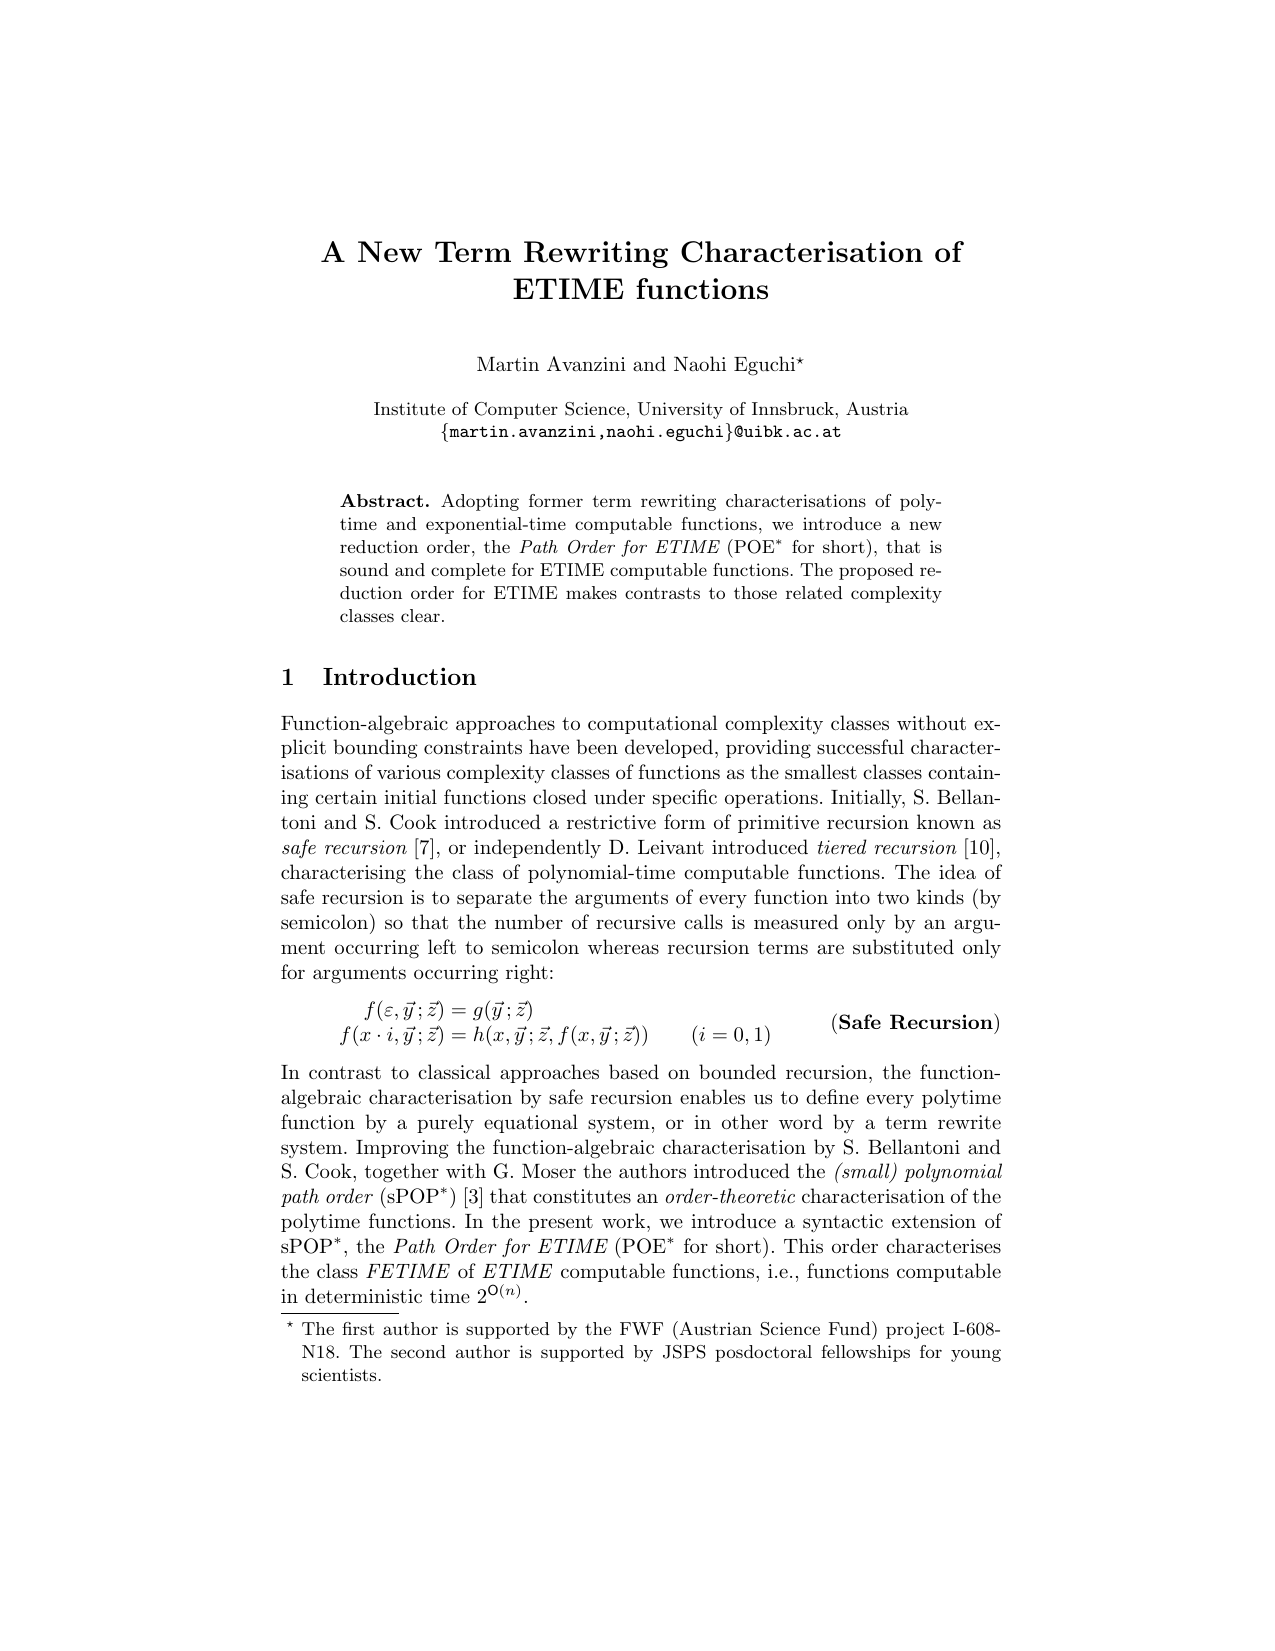 A New Term Rewriting Characterisation of ETIME functions